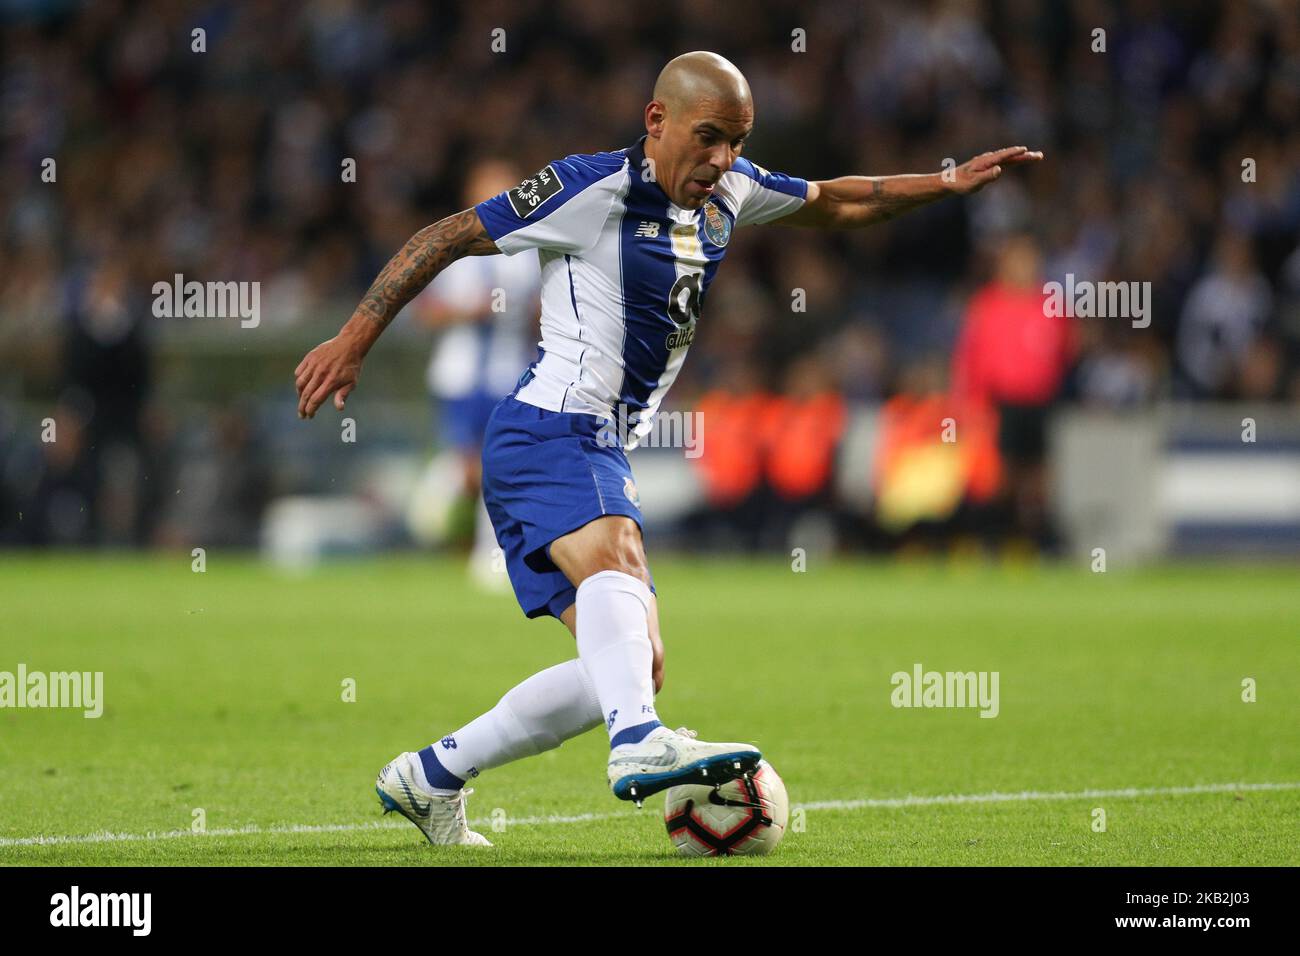 Porto's Uruguayan defender Maxi Pereira in action during the Premier League 2018/19 match between FC Porto and CD Feirense, at Dragao Stadium in Porto on October 28, 2018. (Photo by Paulo Oliveira / DPI / NurPhoto) Stock Photo